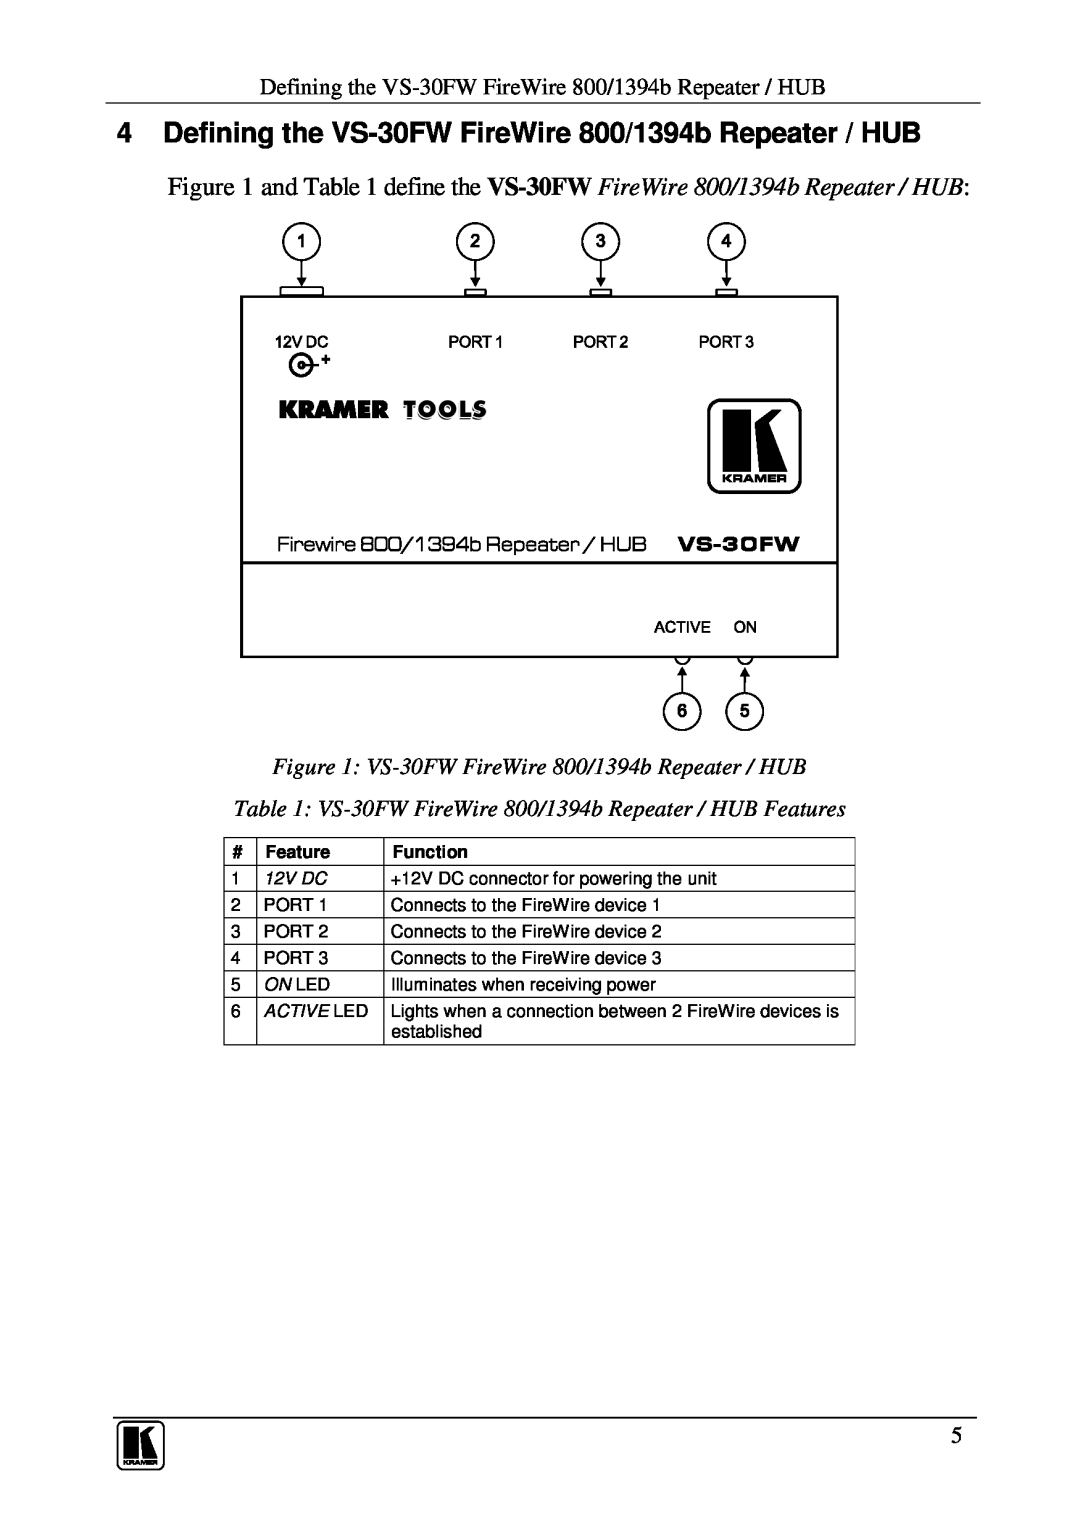 Kramer Electronics user manual Defining the VS-30FW FireWire 800/1394b Repeater / HUB, Feature, Function, 12V DC, On Led 